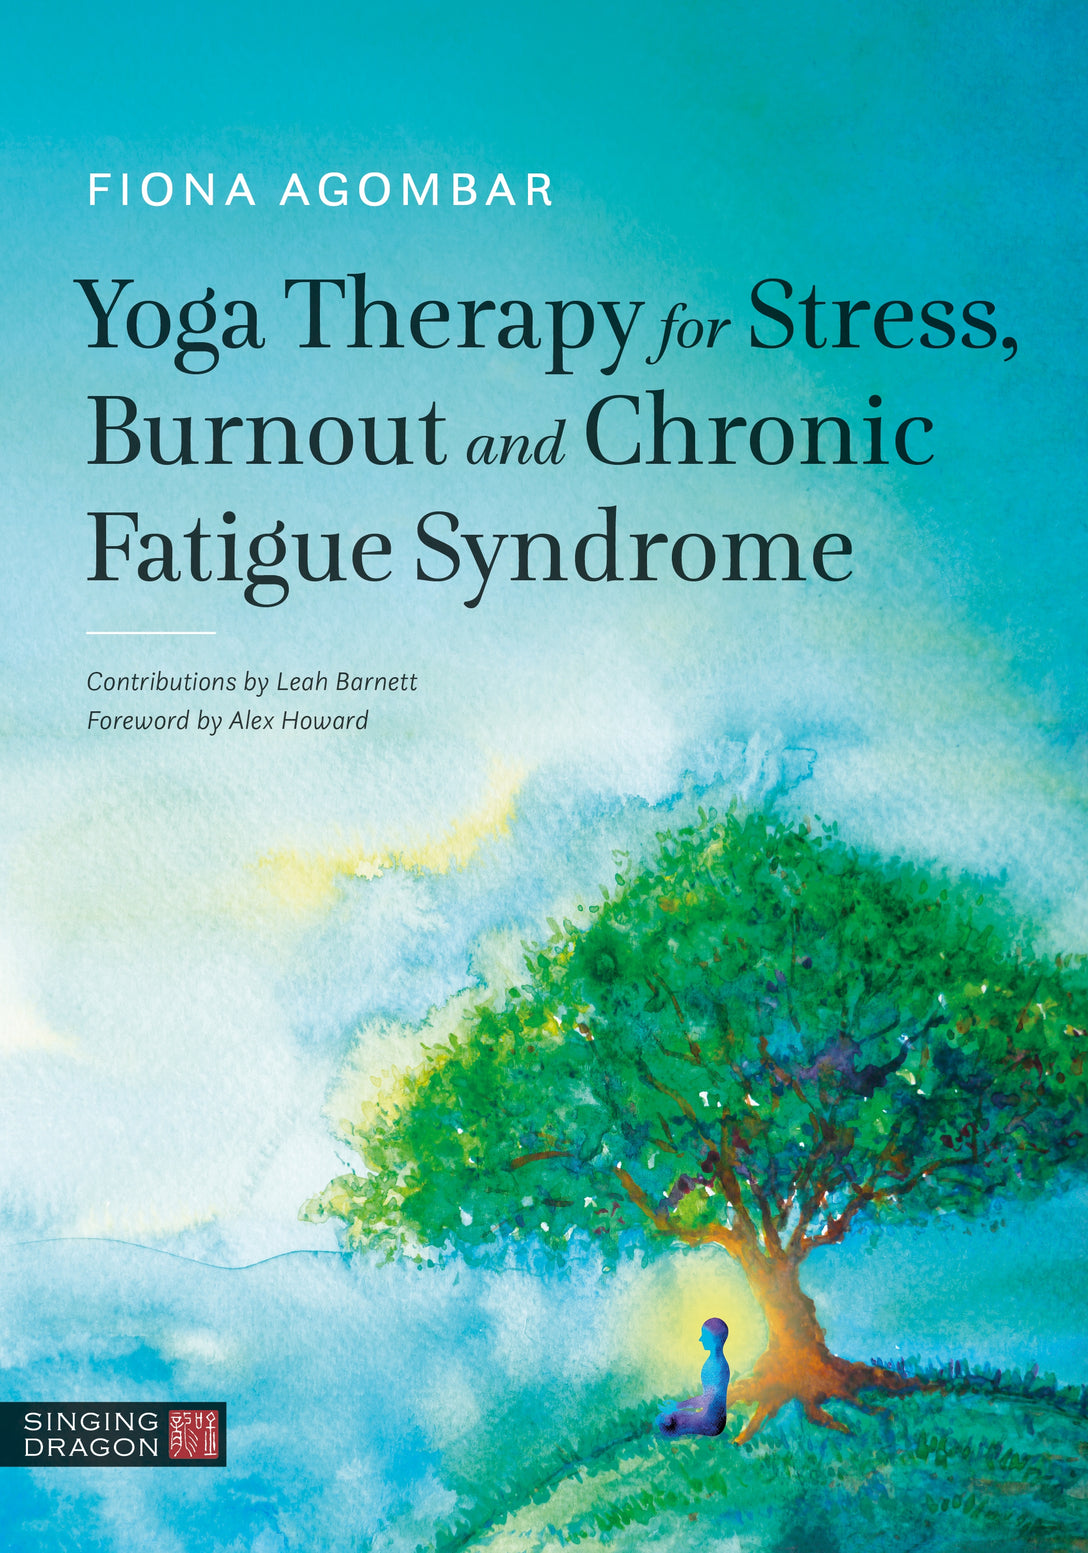 Yoga Therapy for Stress, Burnout and Chronic Fatigue Syndrome by Fiona Agombar, Alex Howard